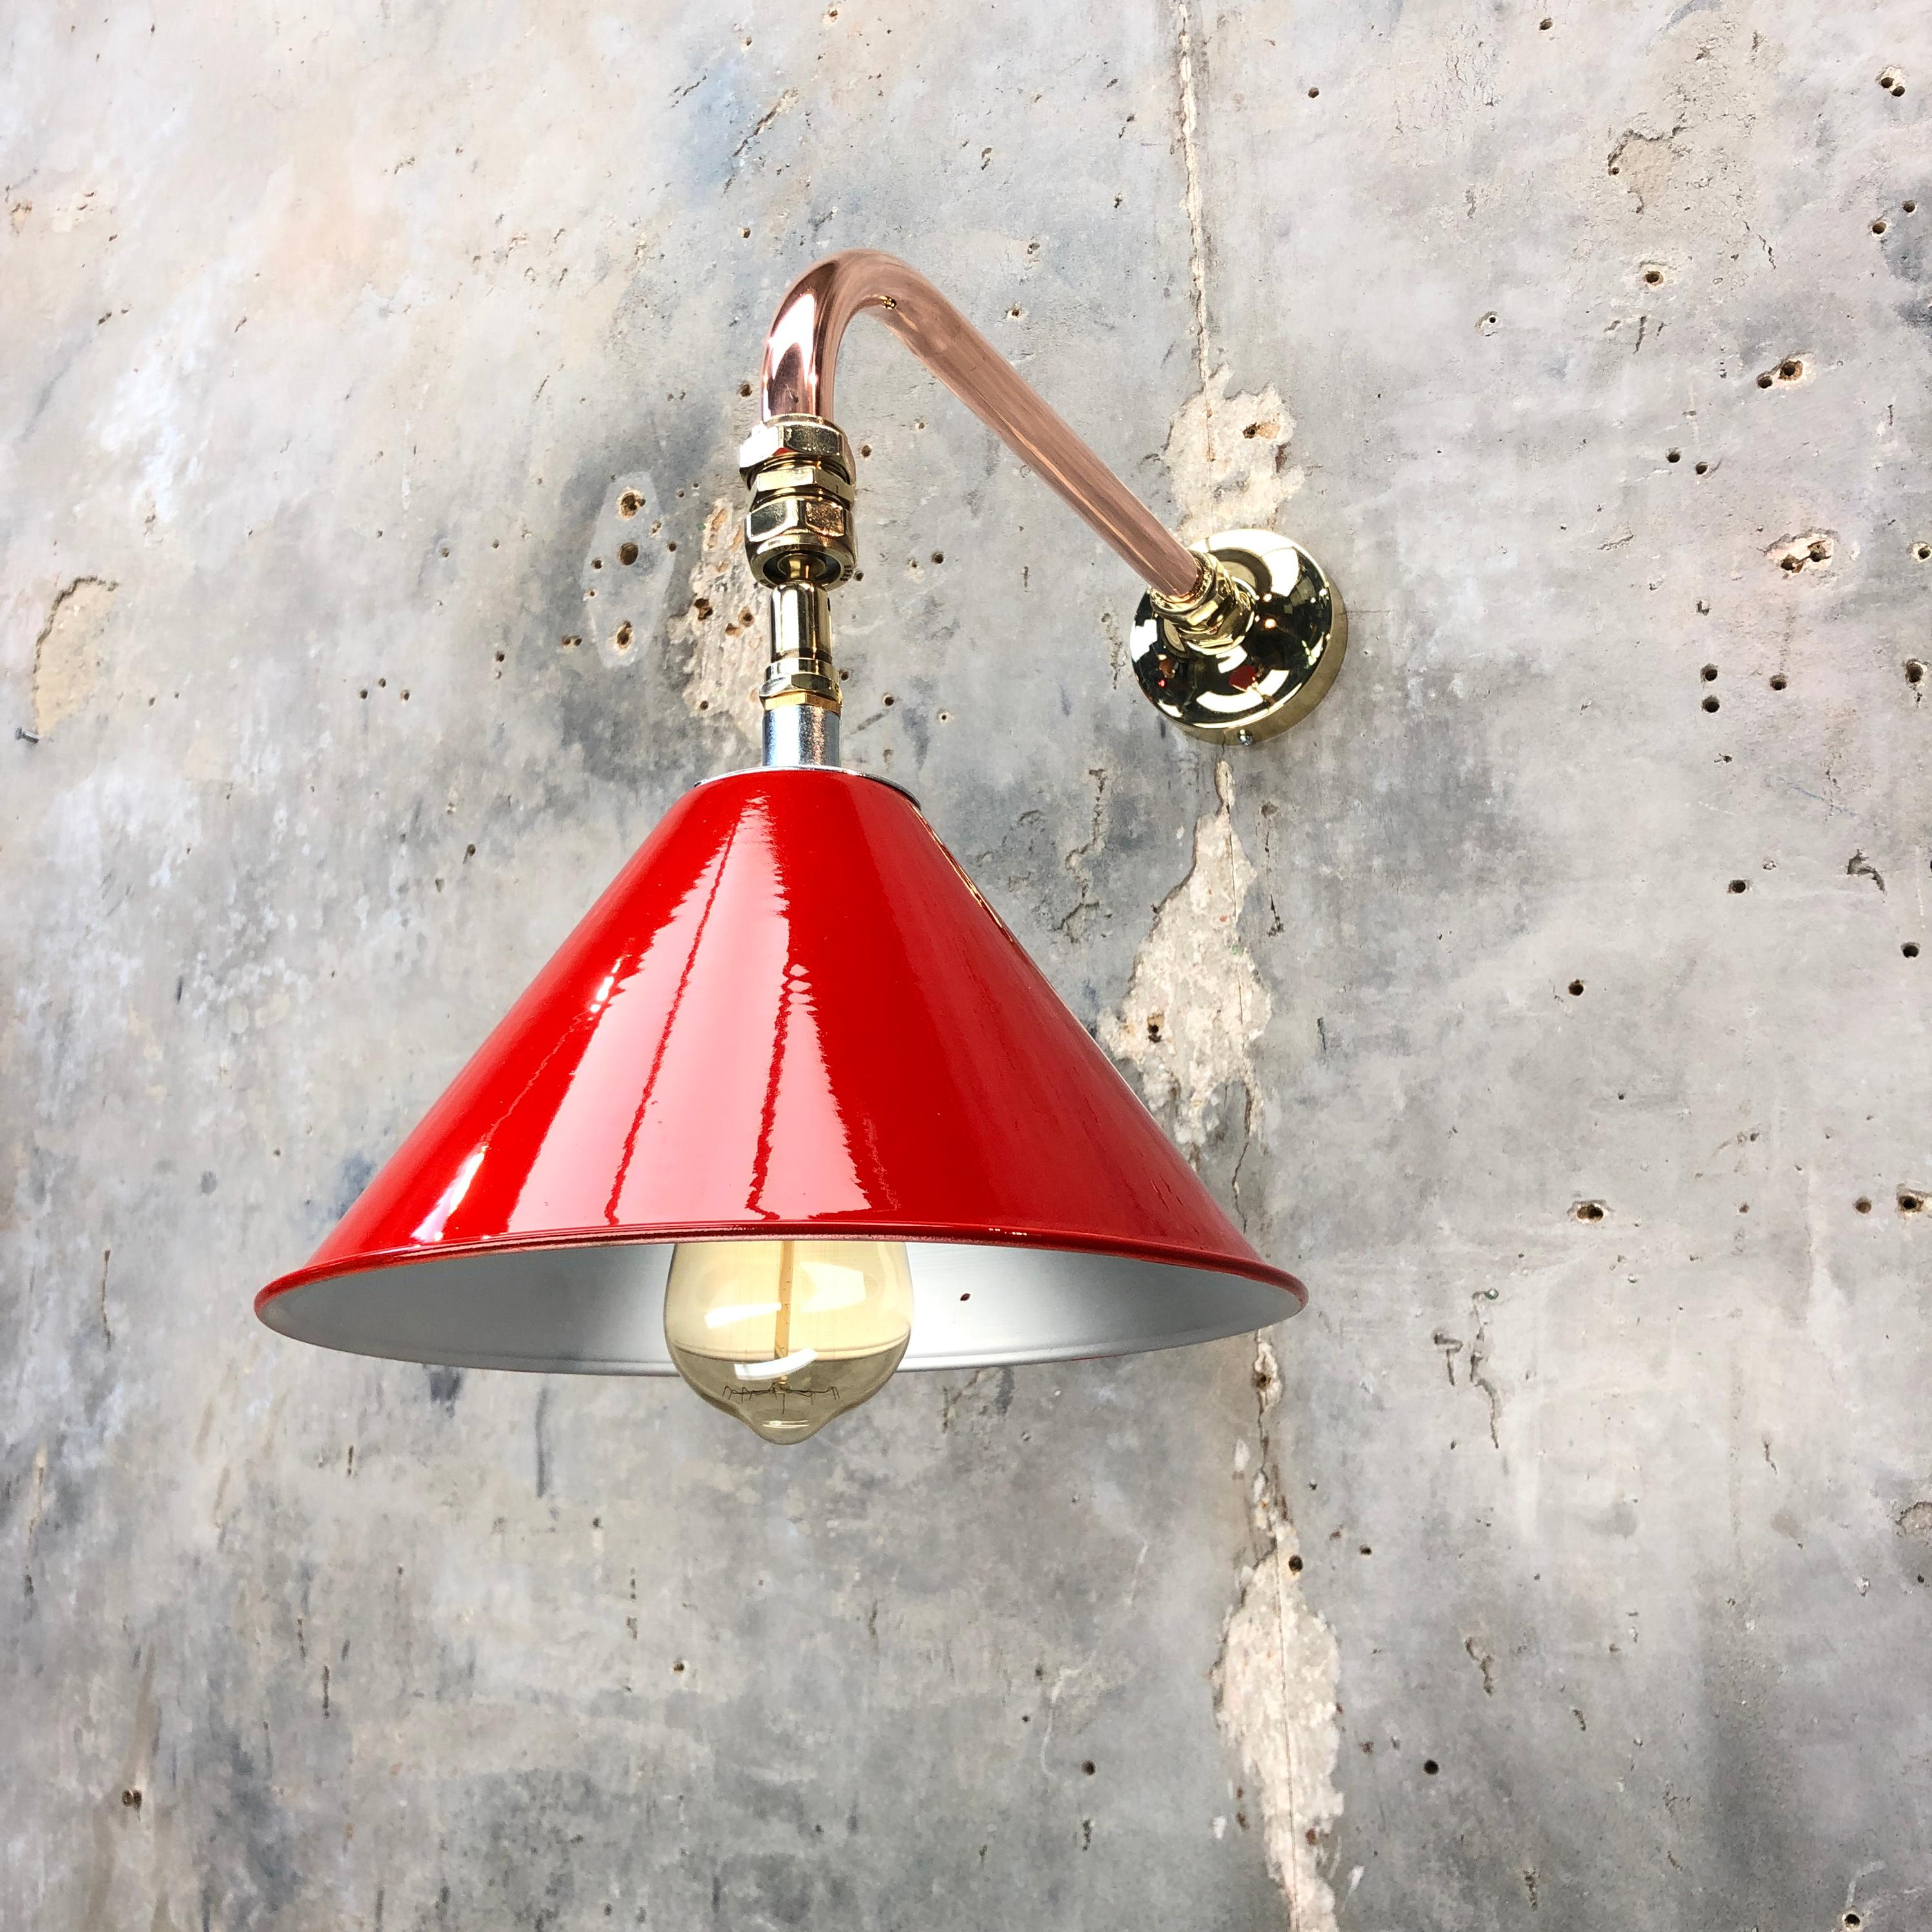 1980 British Army Lamp Shade in Red with Copper Cantilever Wall Lamp Edison Bulb In Excellent Condition For Sale In Leicester, Leicestershire